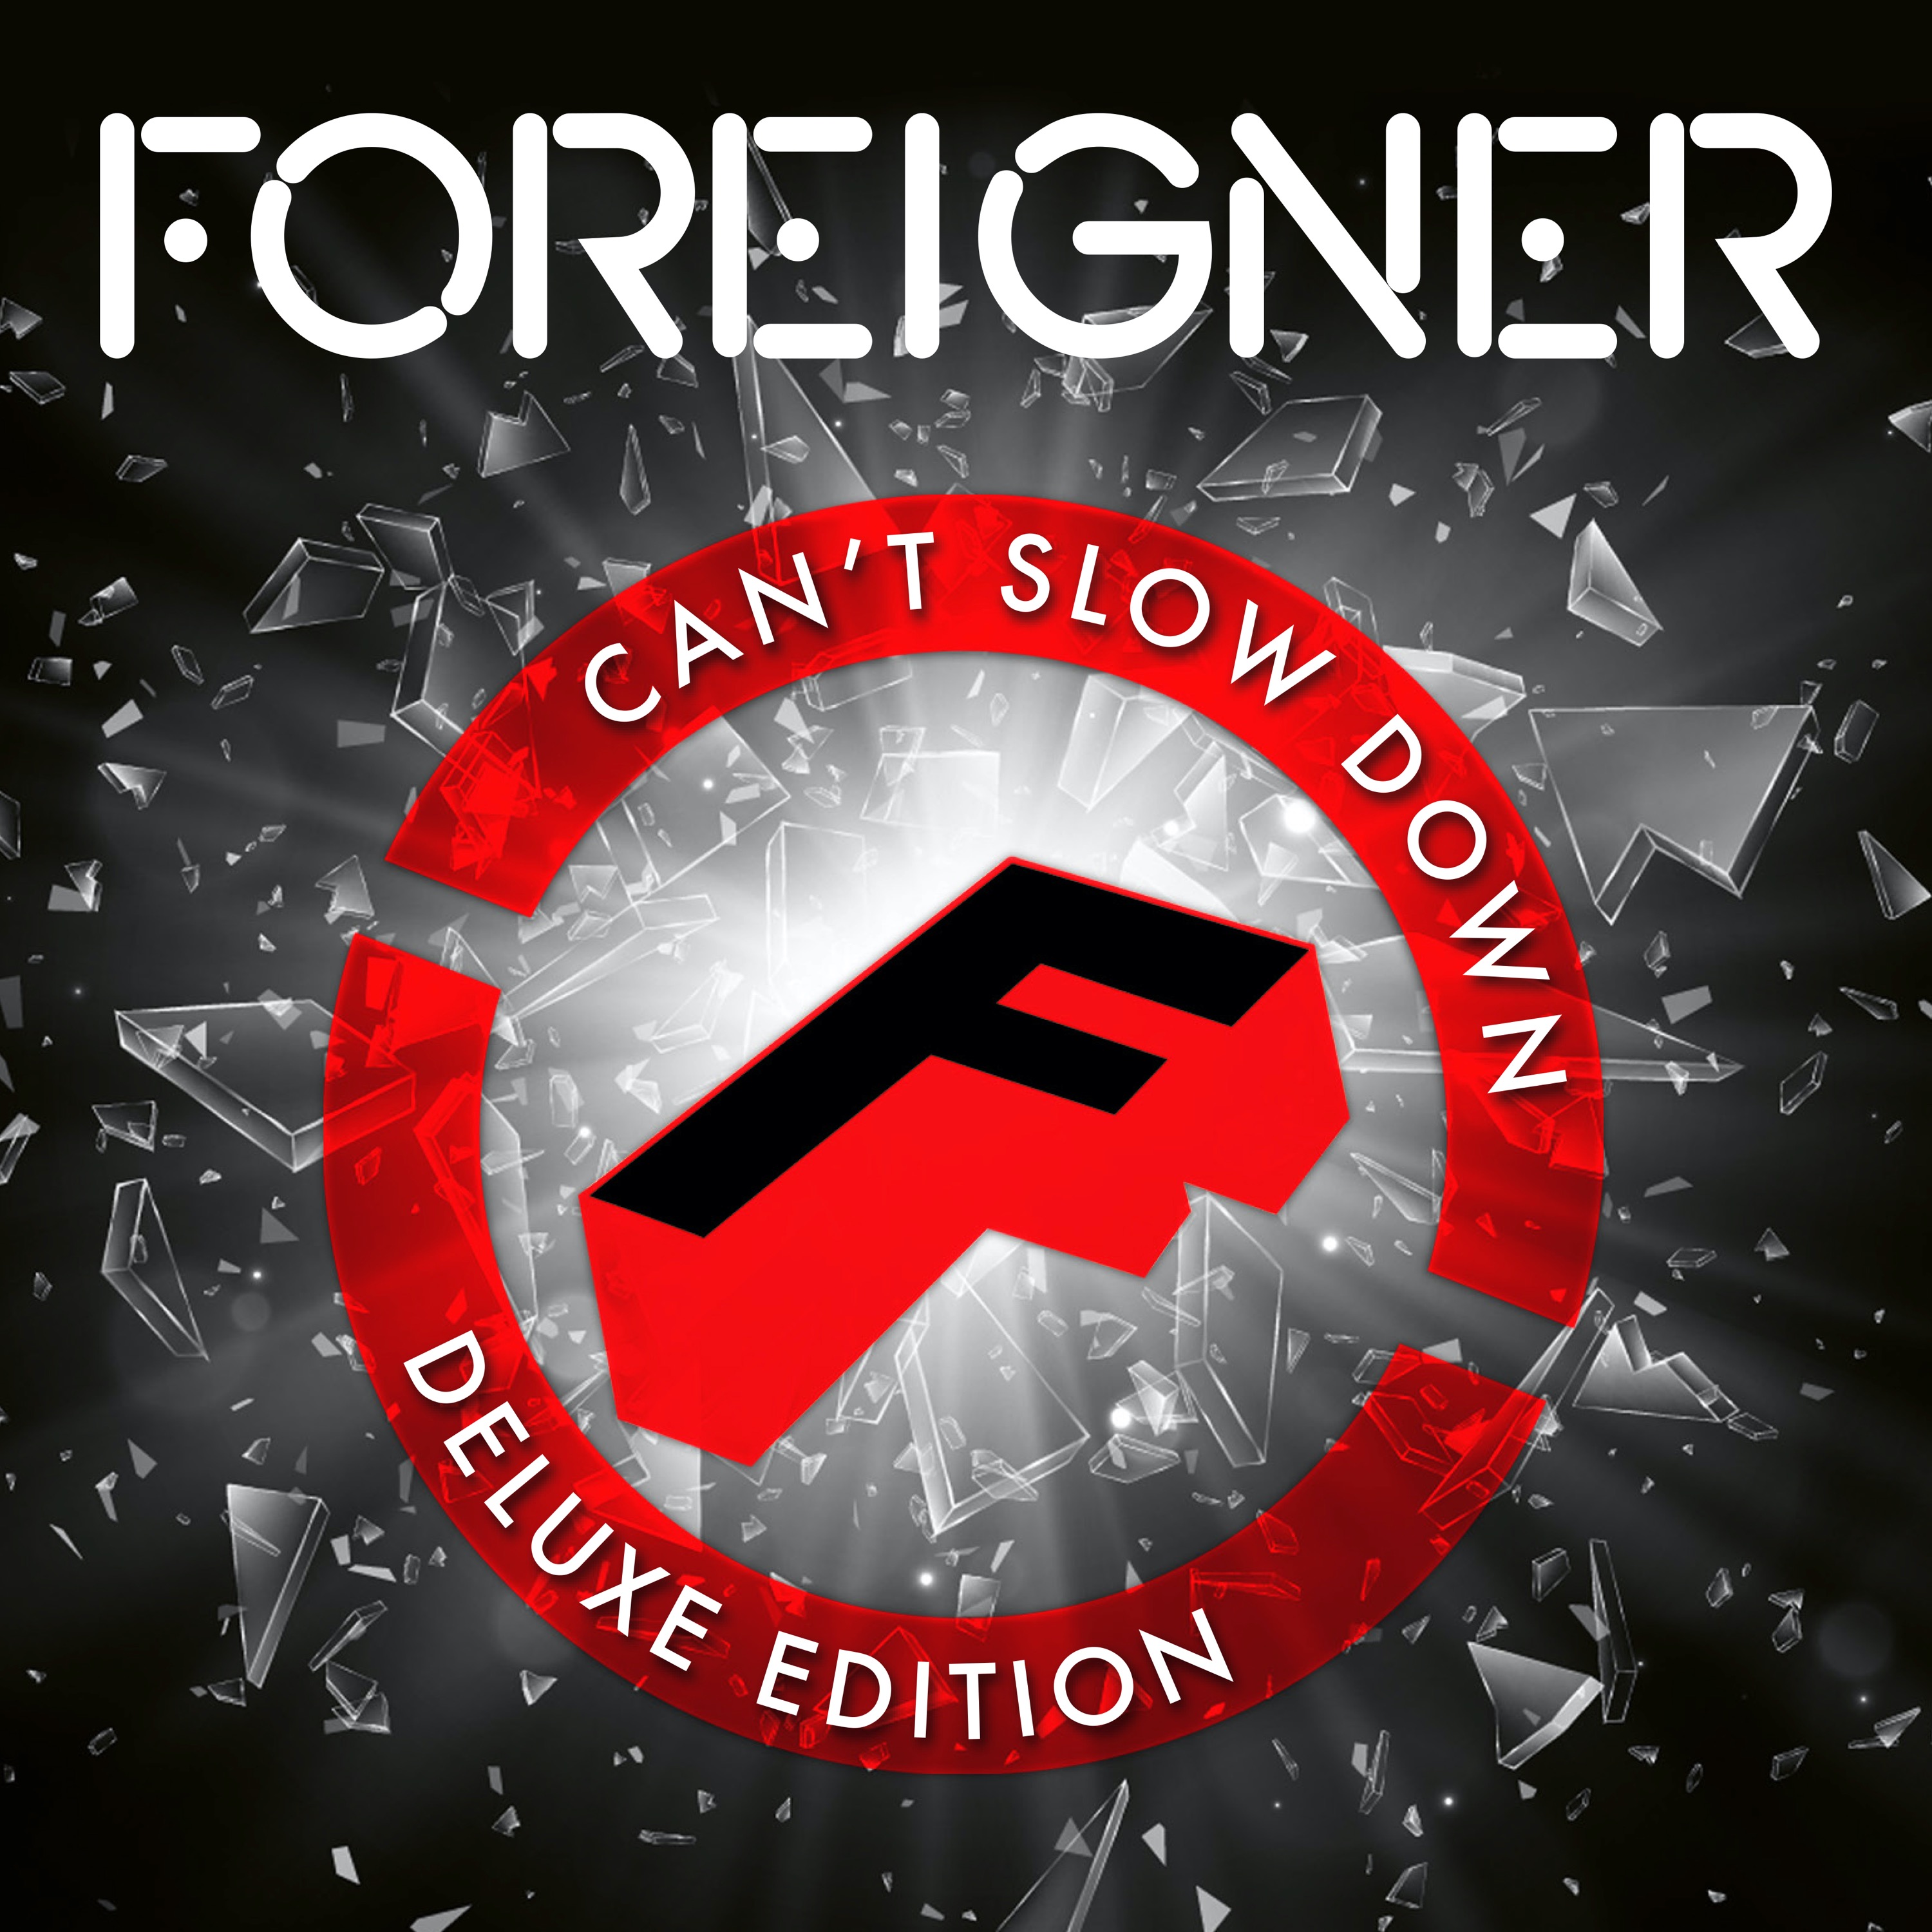 Foreigner - Can't Slow Down (Deluxe Edition) - 2xCD